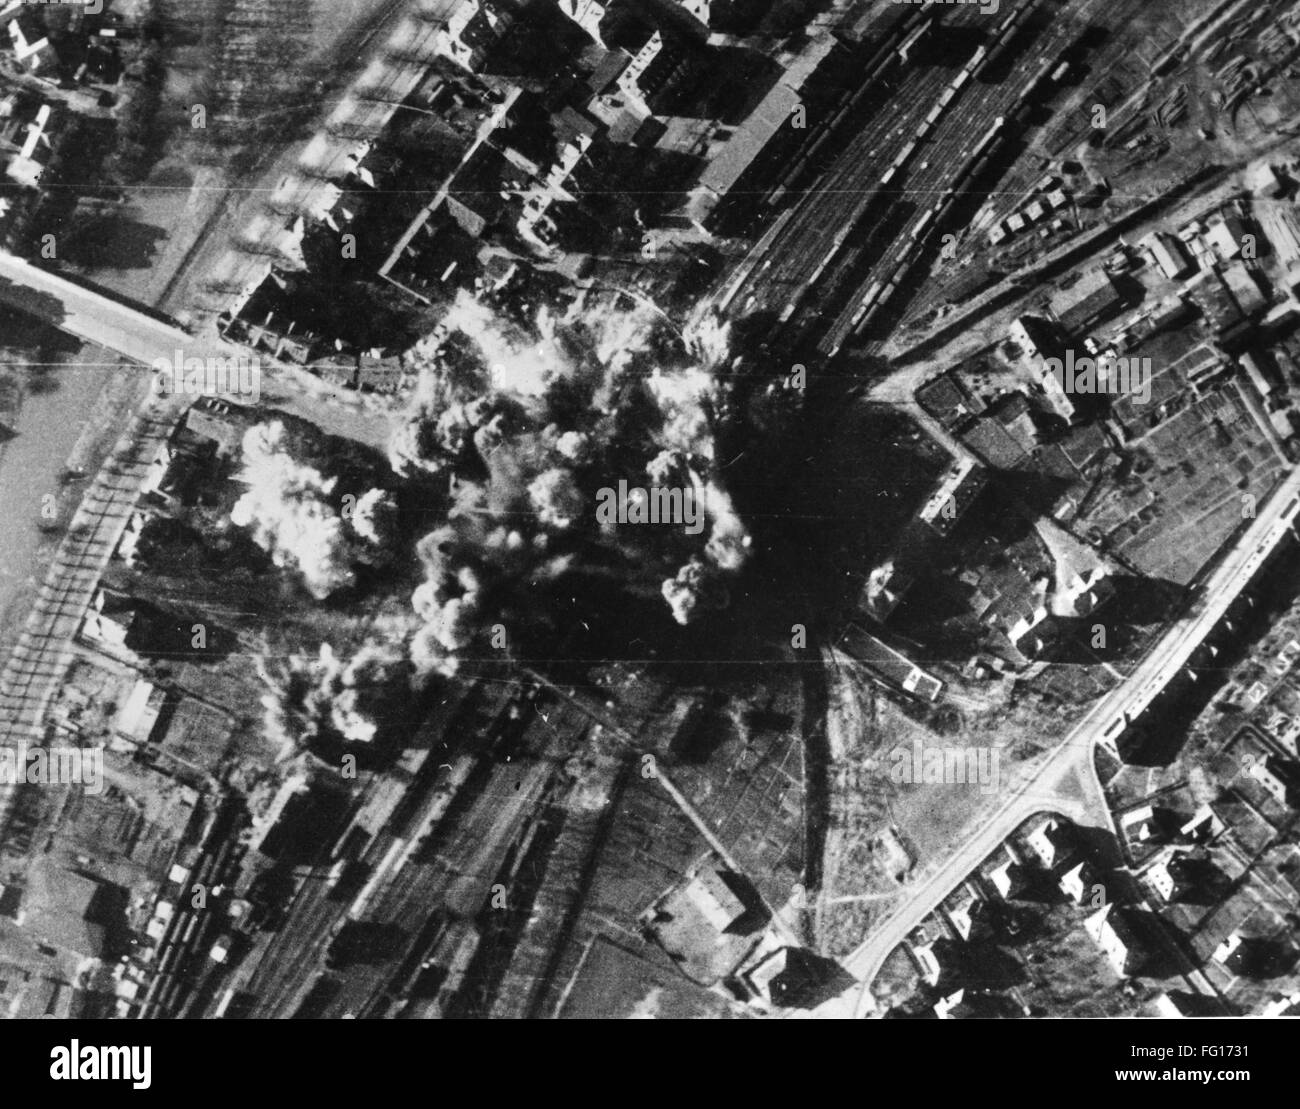 railroad marshalling yards at Marburg,Germany, under attack by the 9th U.S. Air Force on 22 February 1945.